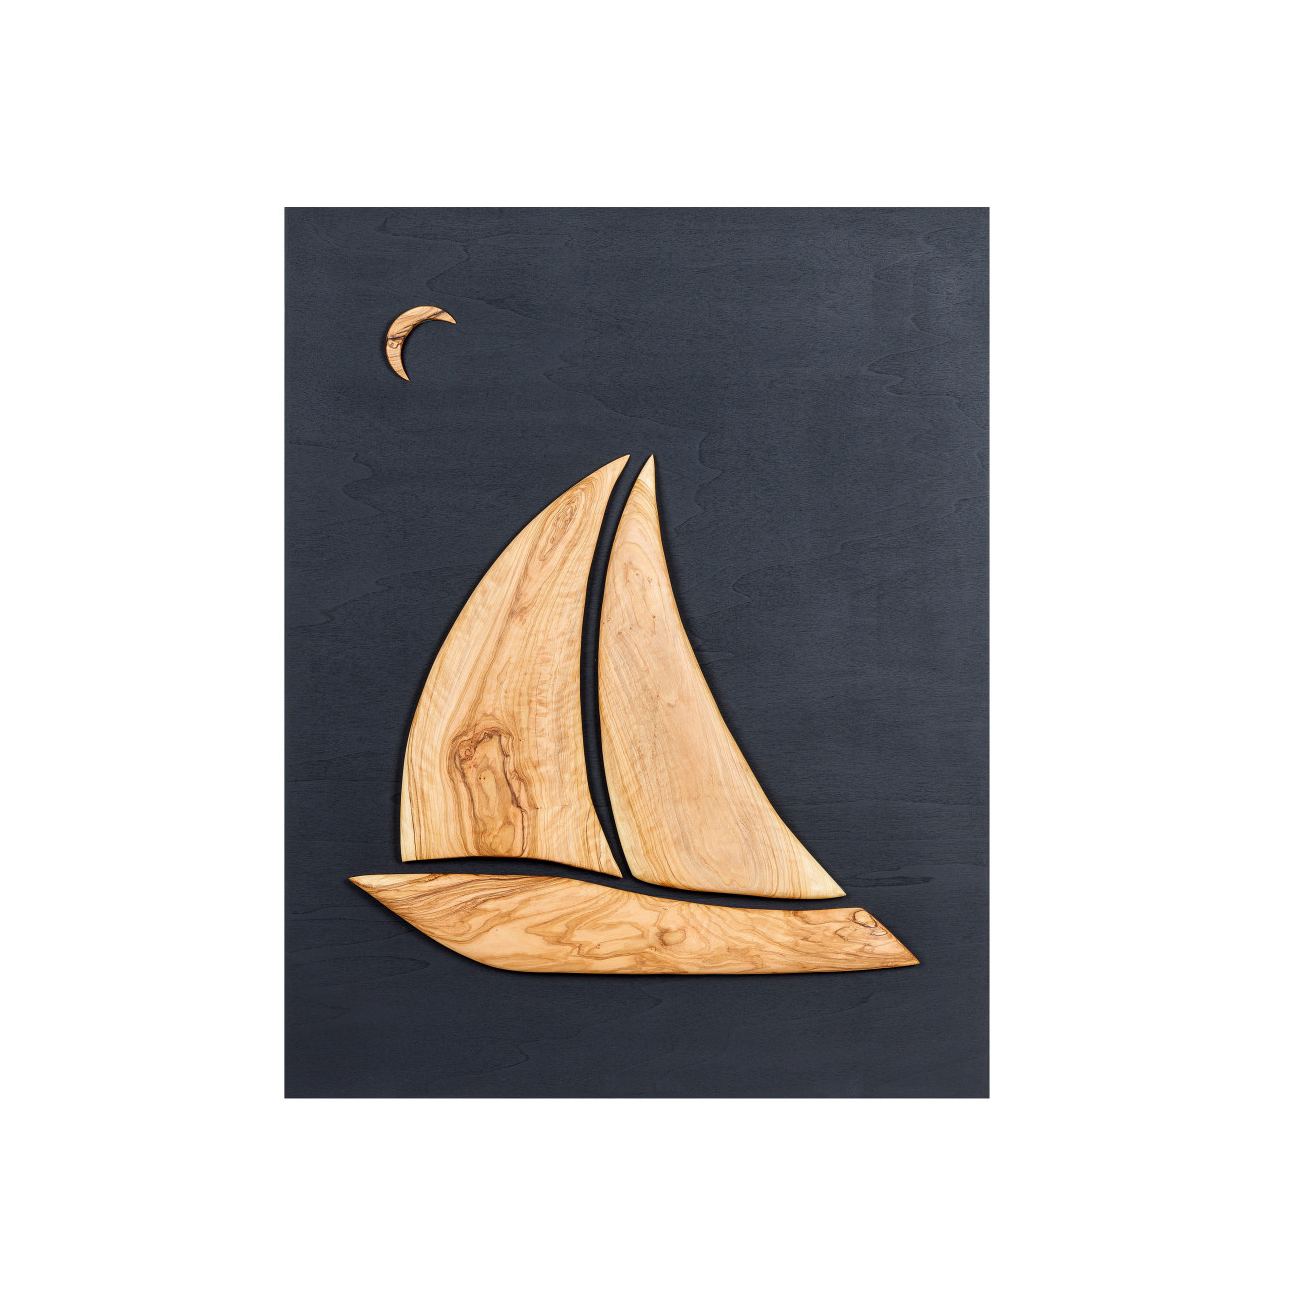 Olive Wood Sailboat, Handmade Modern Wall Decor, Black Wooden Background,  Design A, 55x70cm. Ideal Decoration Gift. Large Size